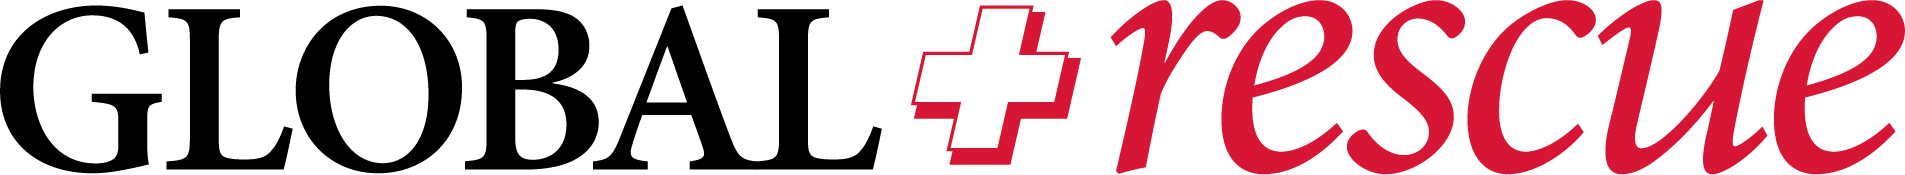 global rescue logo.png